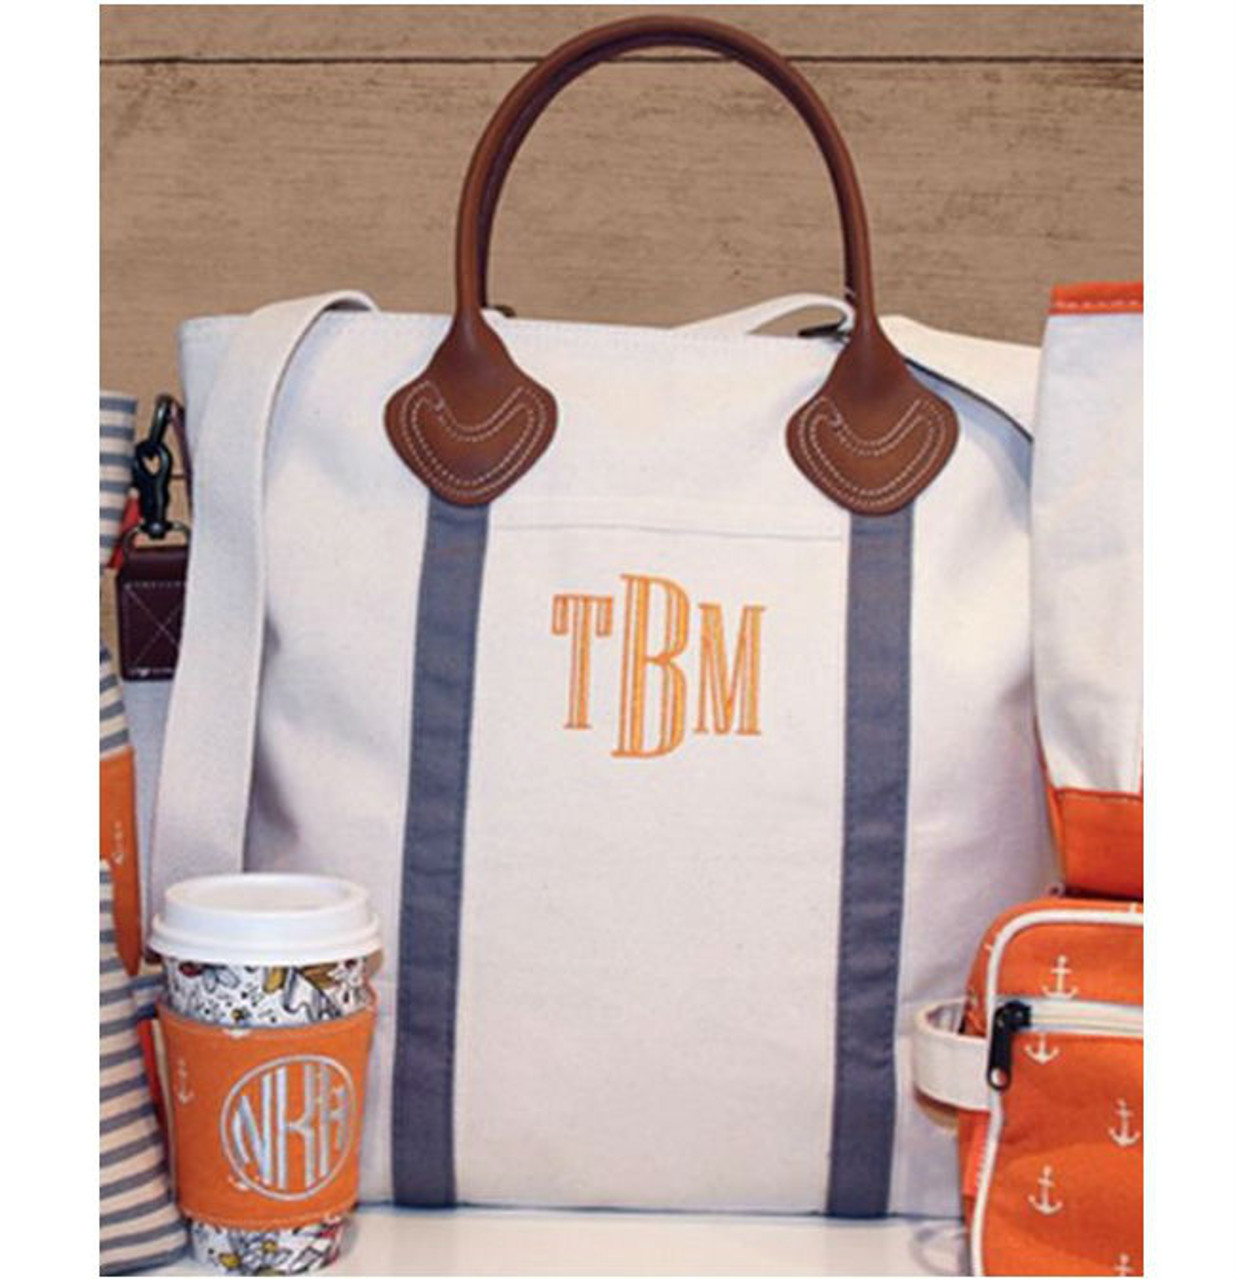 SUNELGIRL Personalized Initial Canvas Bag